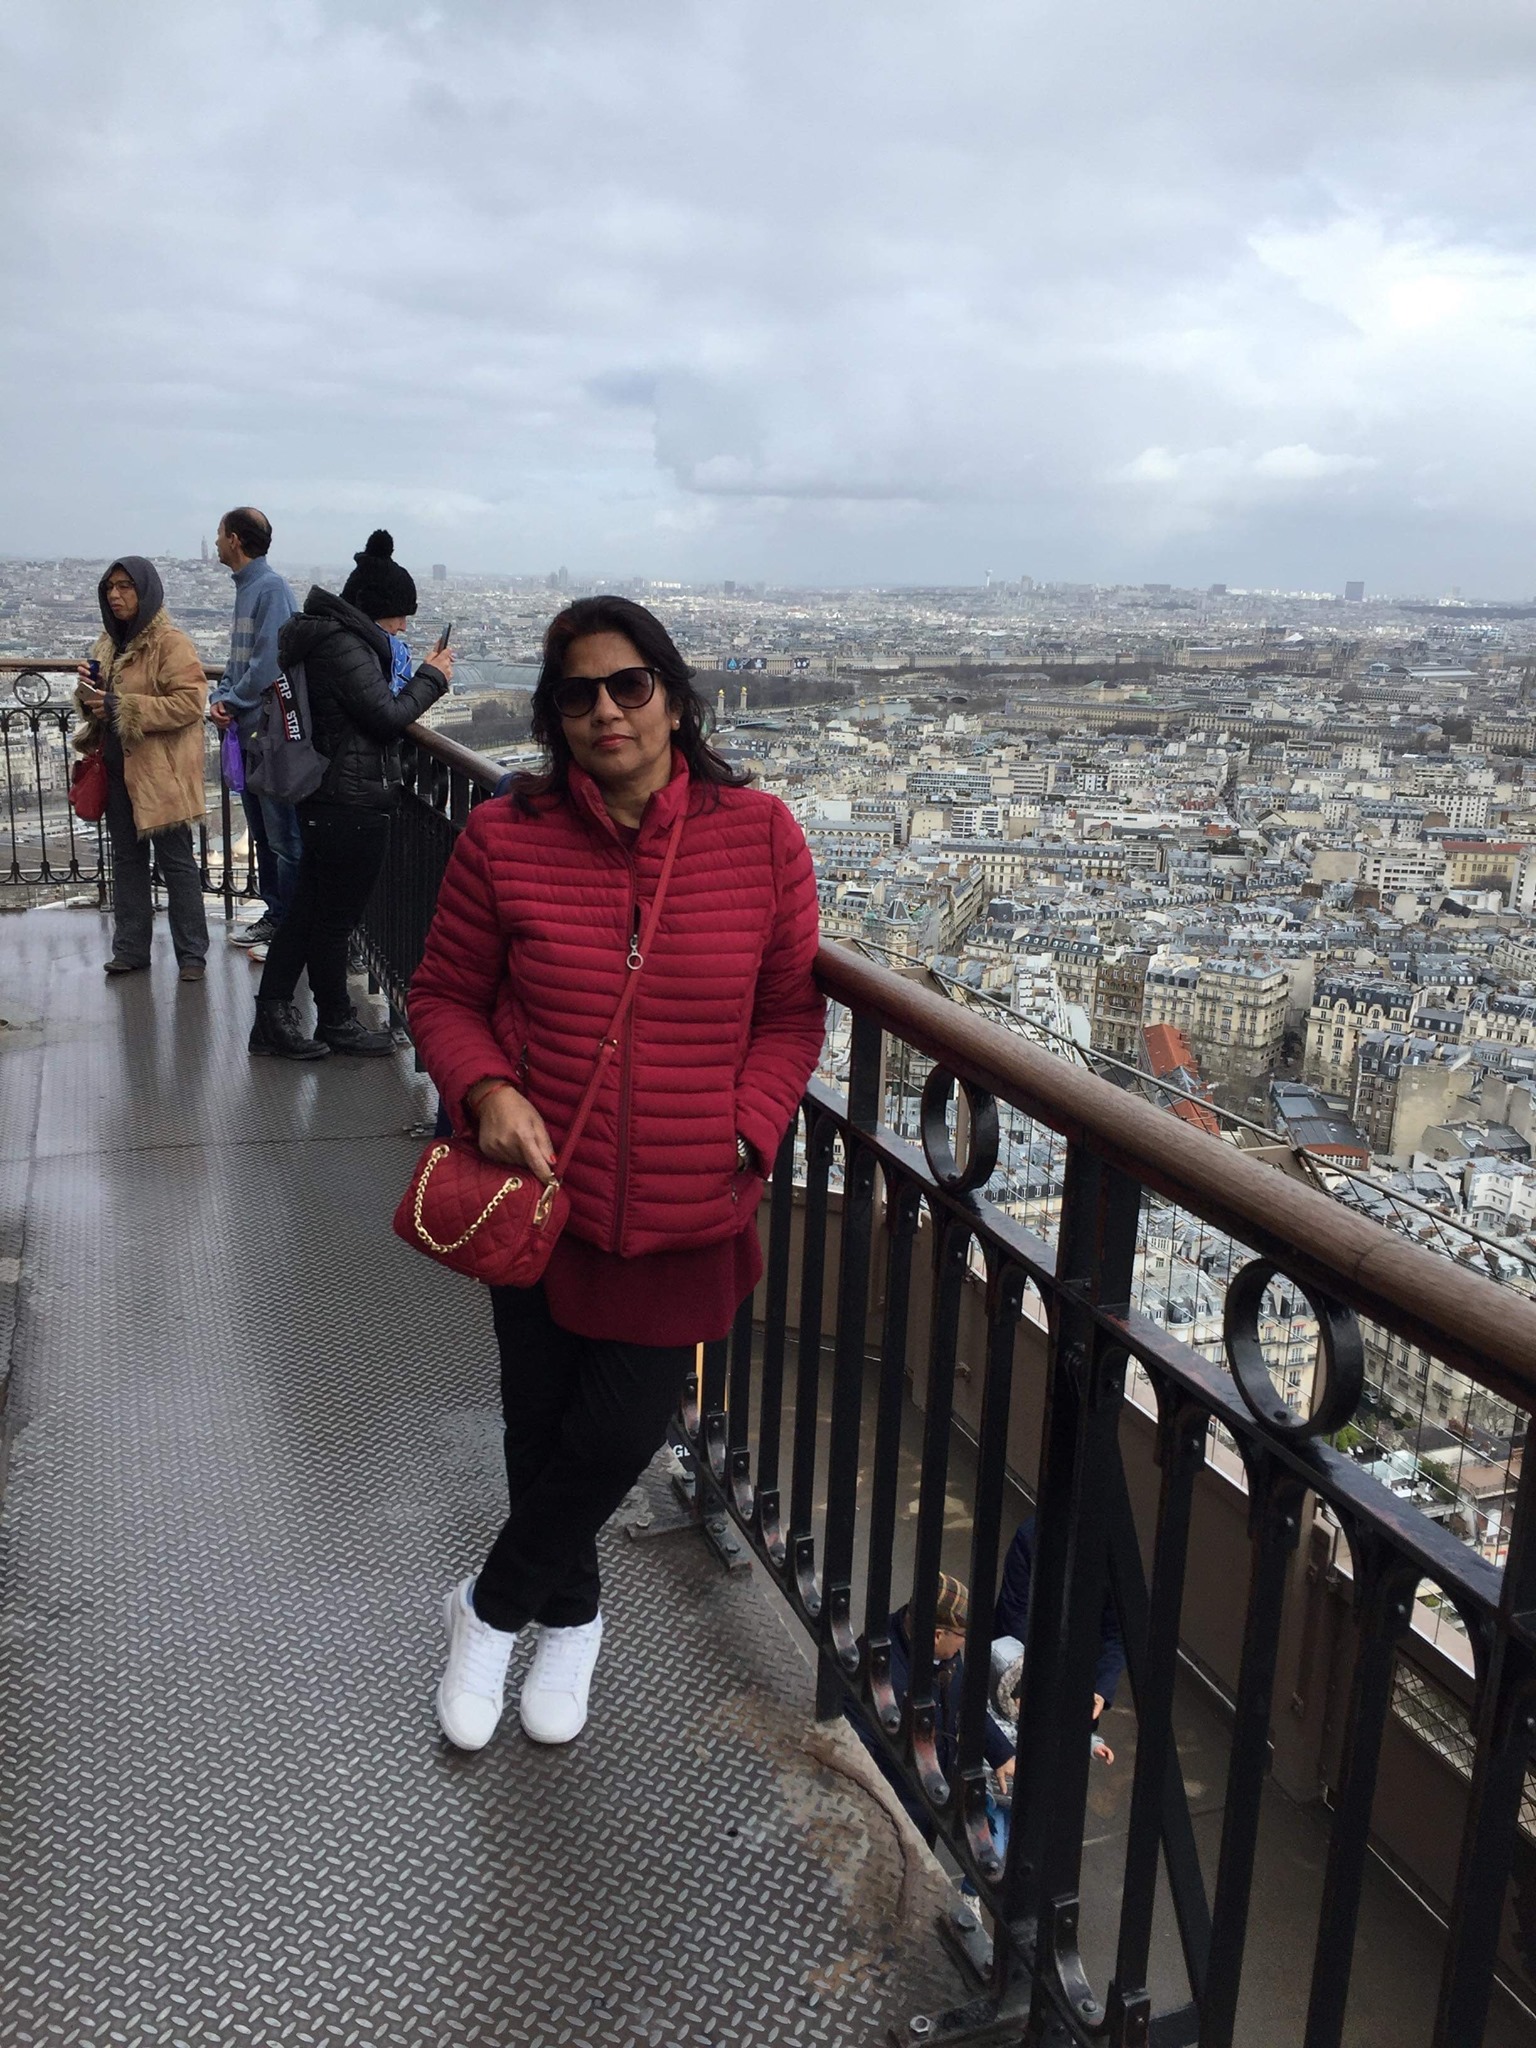 Paru on the top floor of the Eiffel Tower